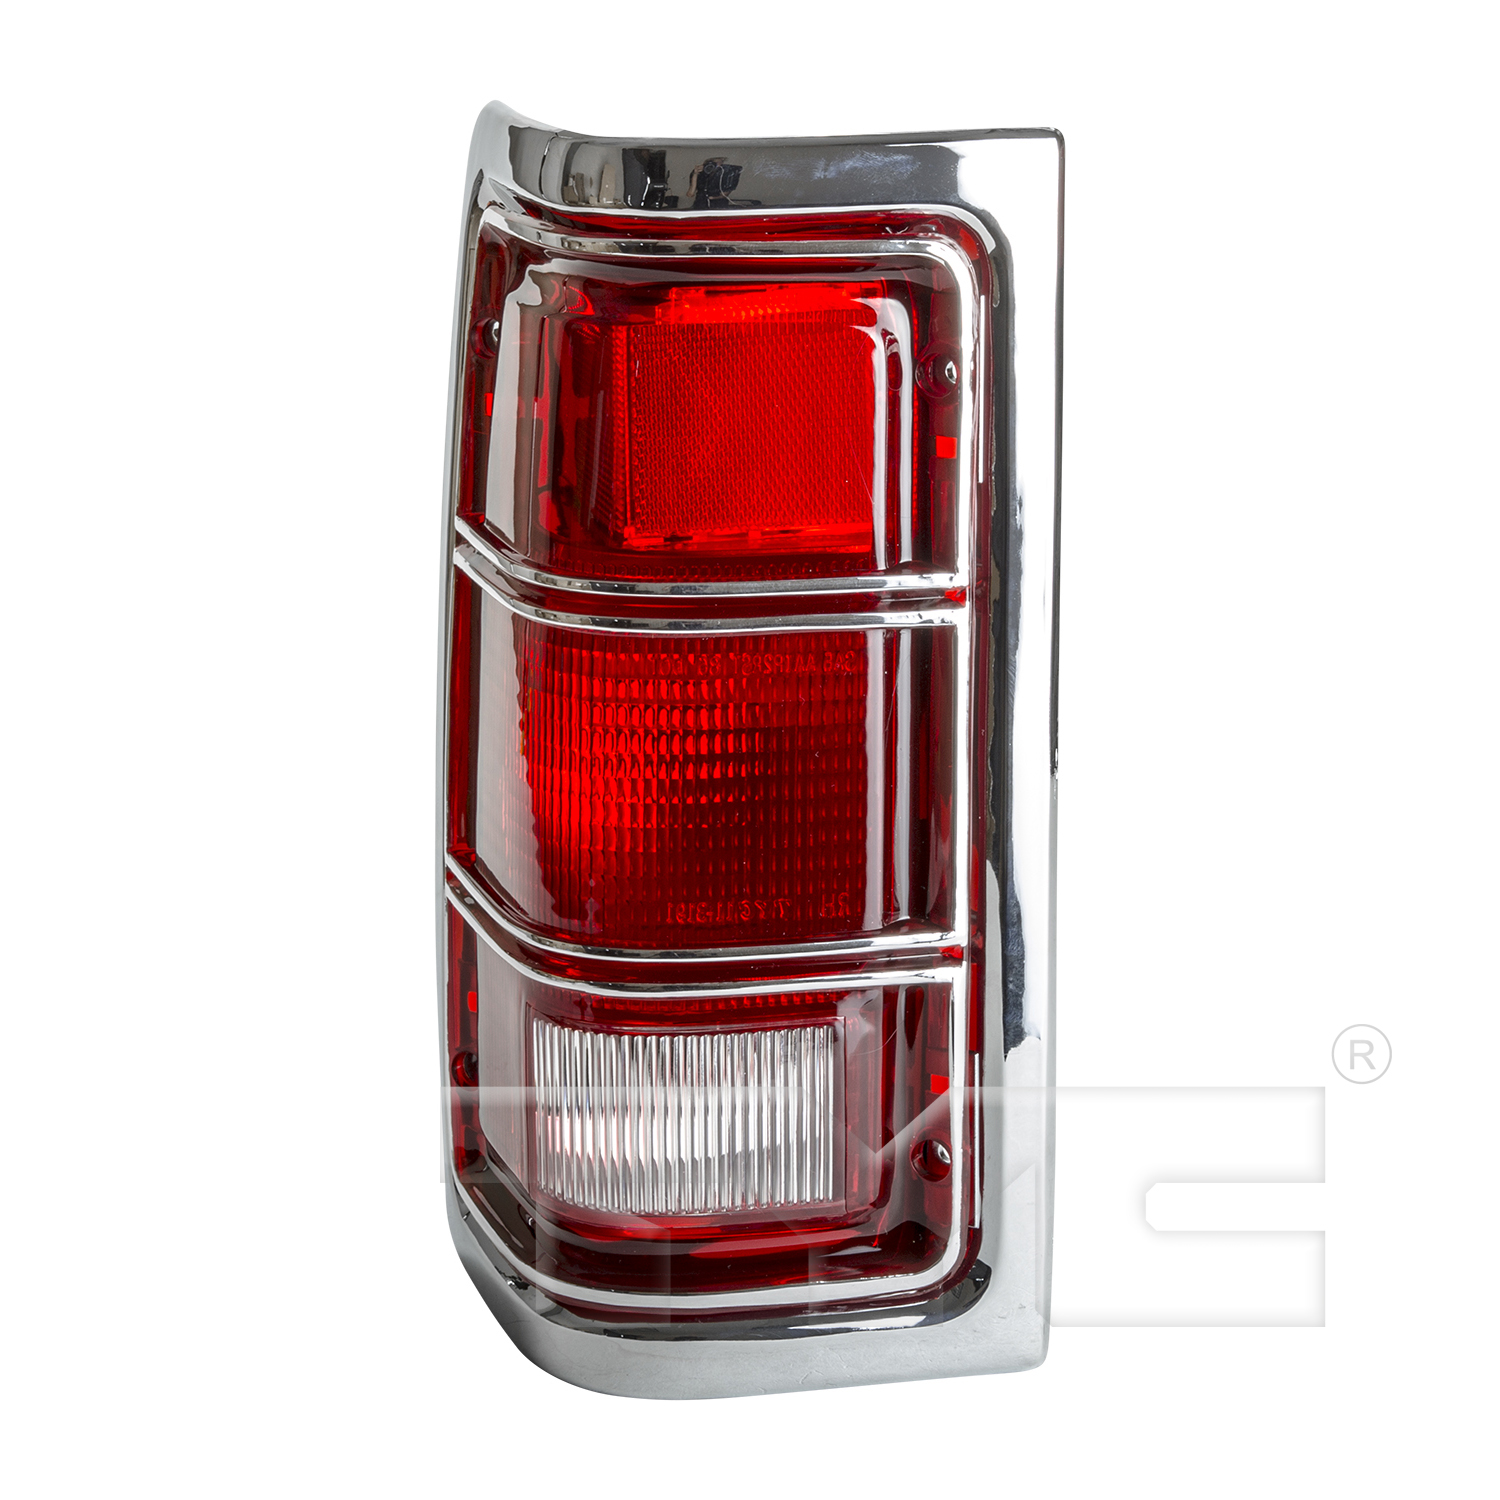 Aftermarket TAILLIGHTS for DODGE - W350, W350,81-87,LT Taillamp lens